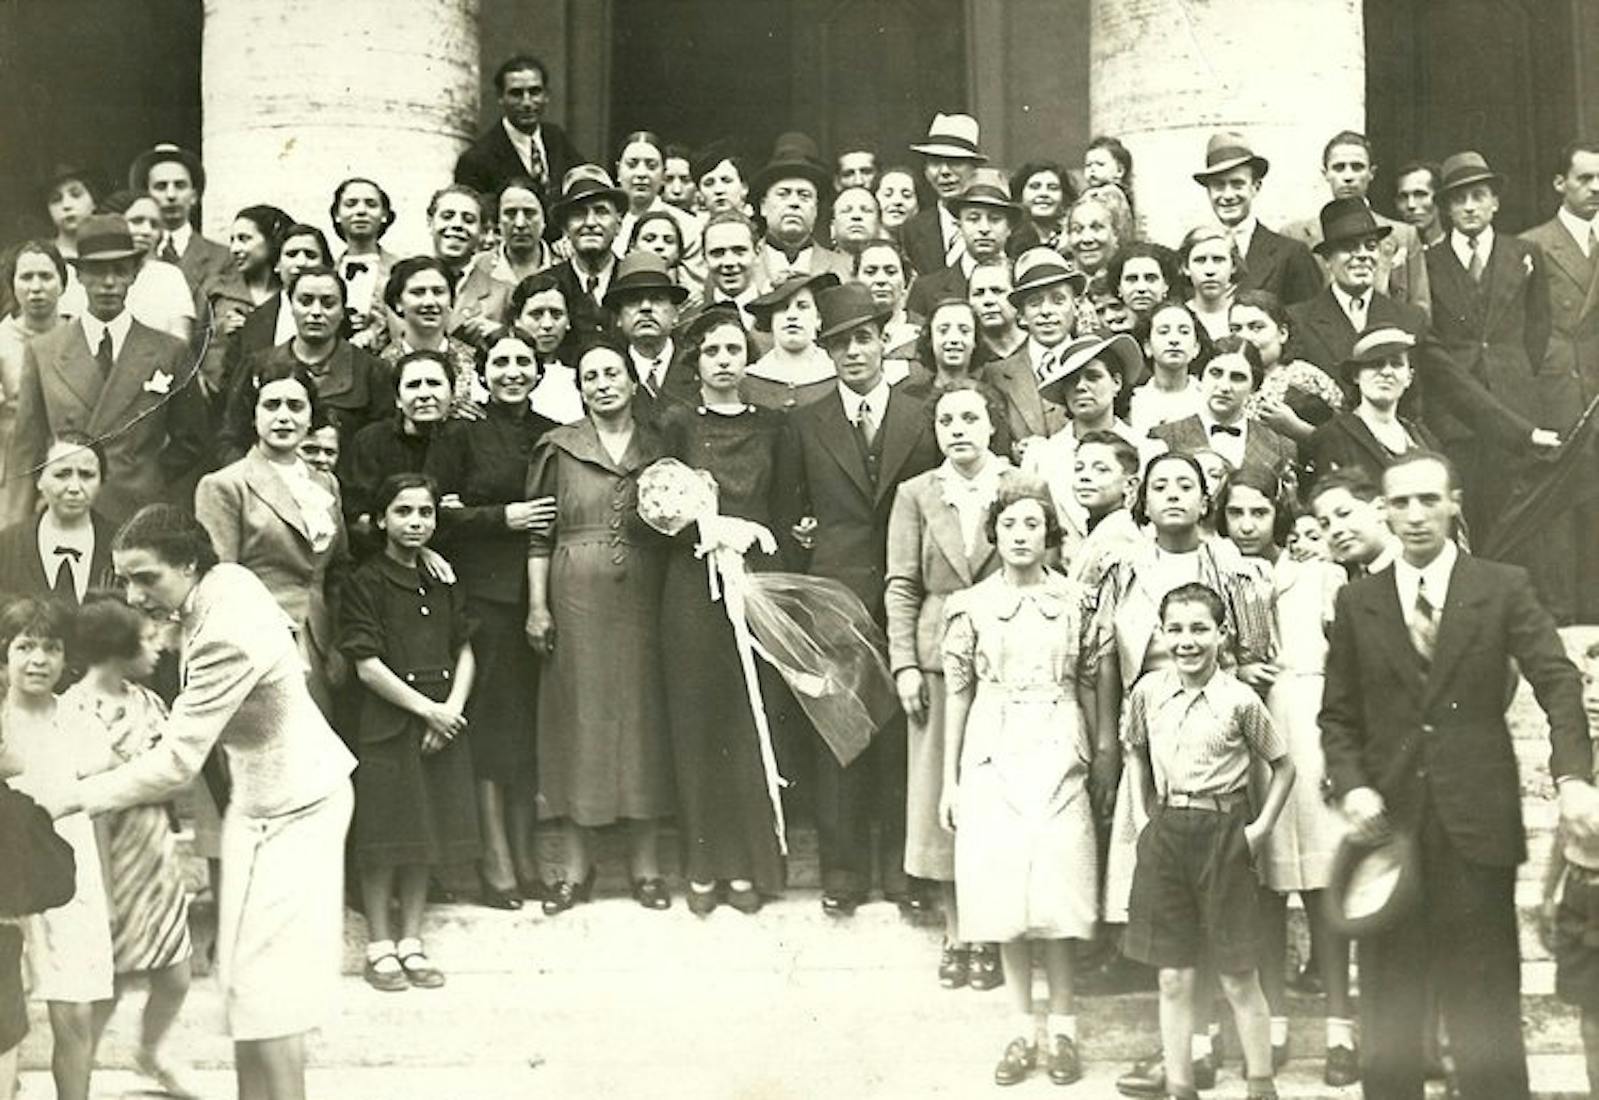 Micaela’s grandparents (center) the Great Synagogue of Rome in 1936 on their wedding day.